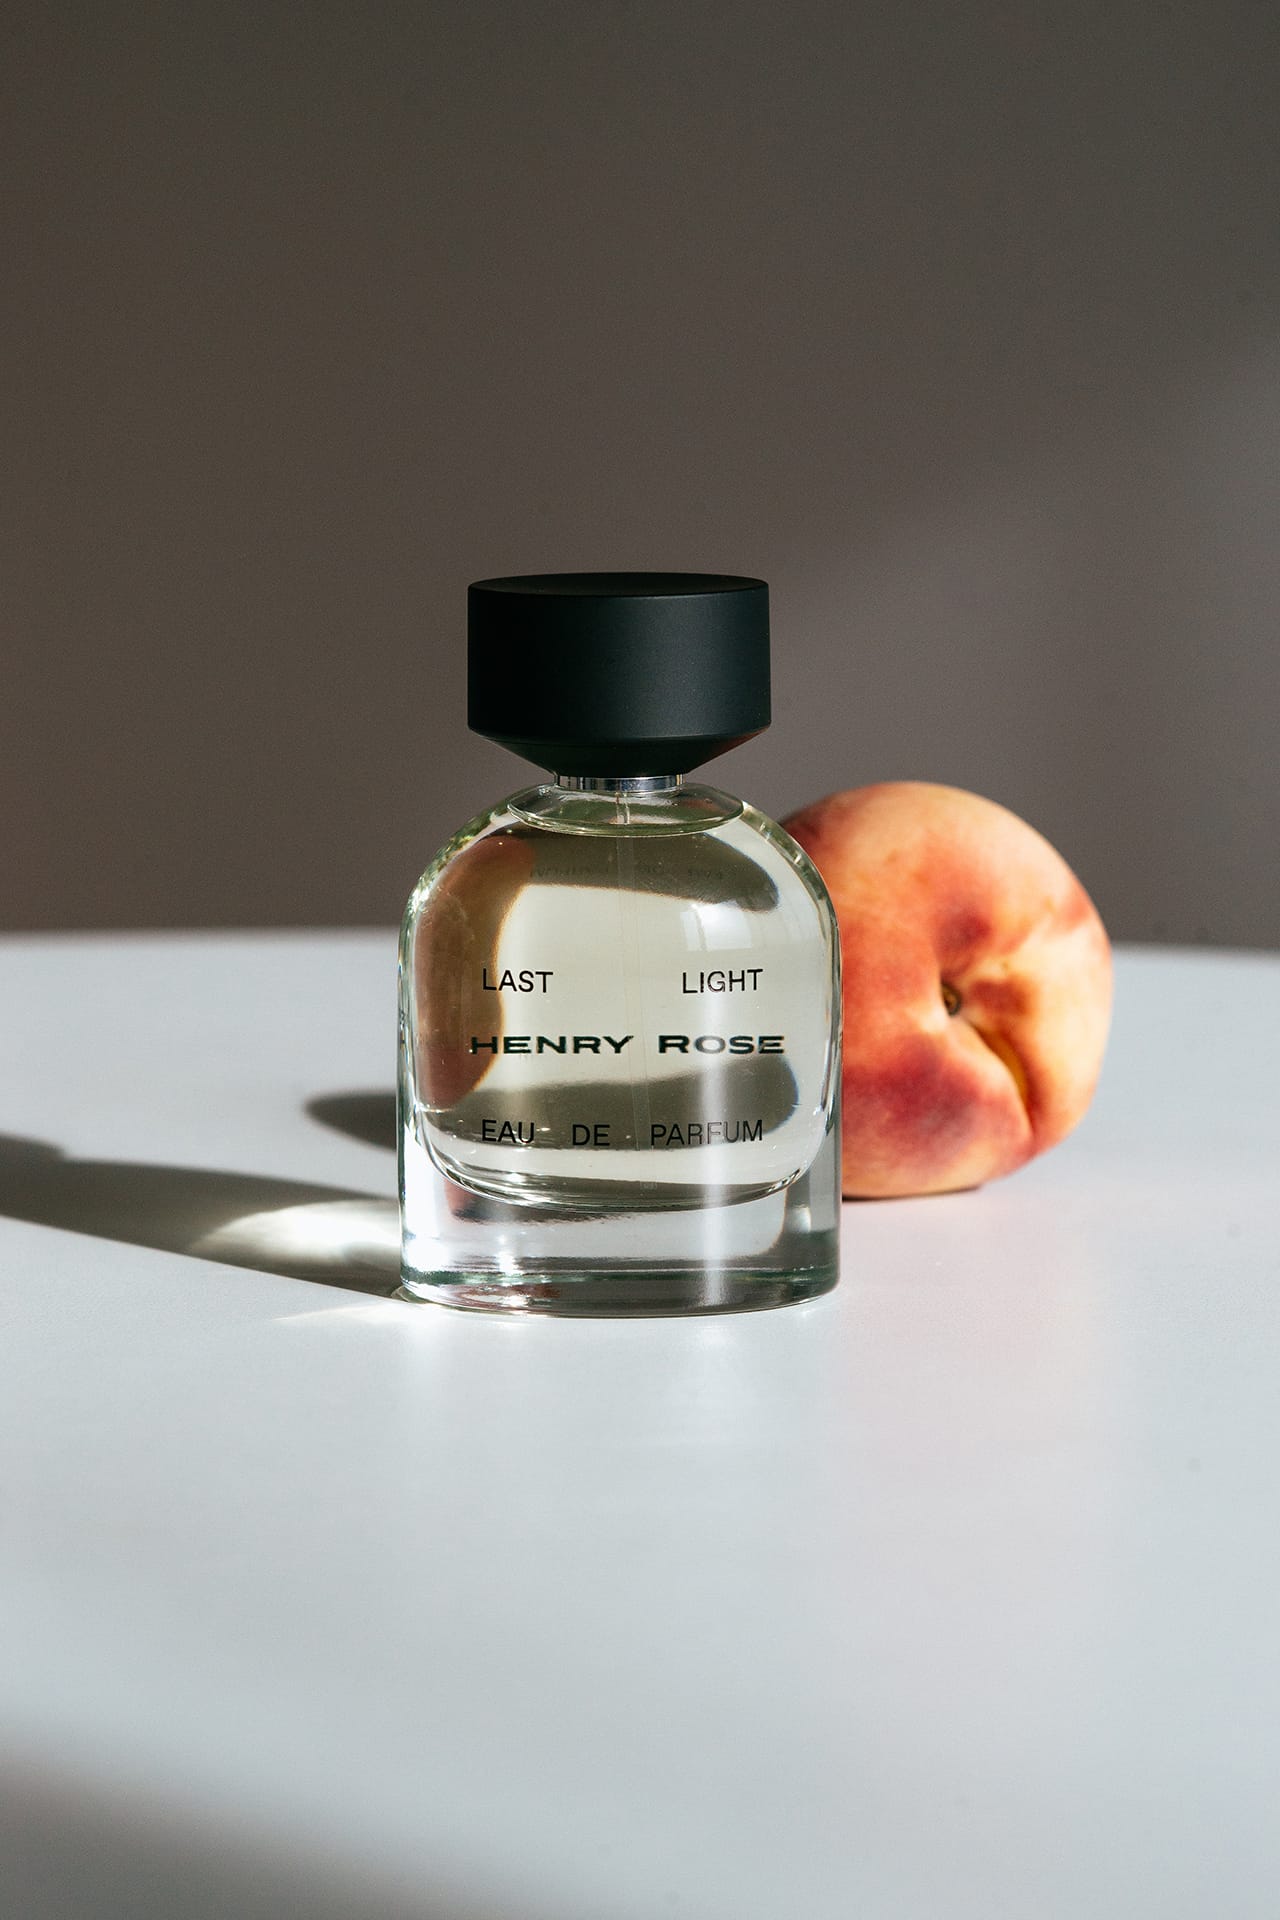 The Best Fall Perfumes Based on Your 